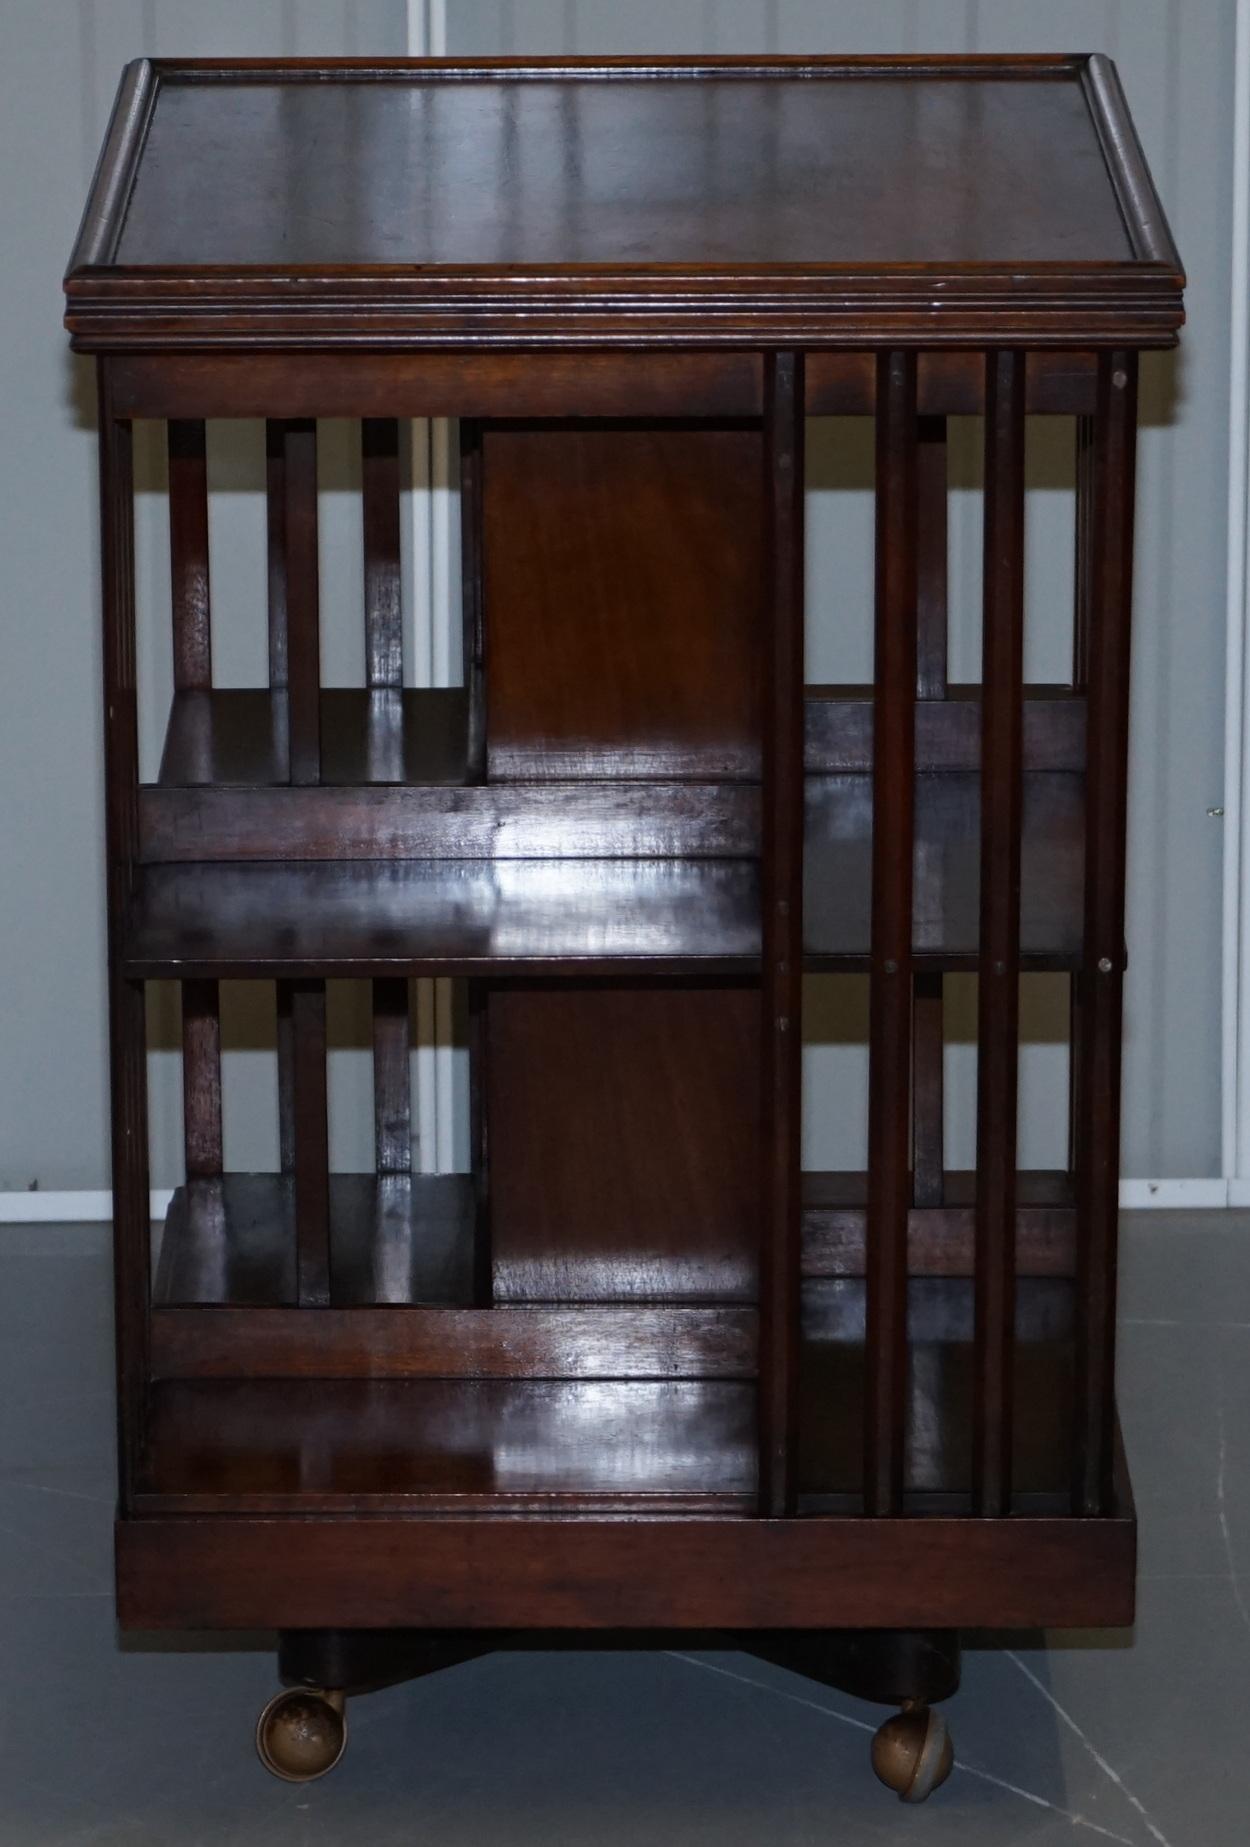 We are delighted to offer for sale this lovely Edwardian revolving Library bookcase on wheels

This is a real decorator’s piece, it works in multiple settings and can be used for smalls and books

The piece is based on early Regency revolving